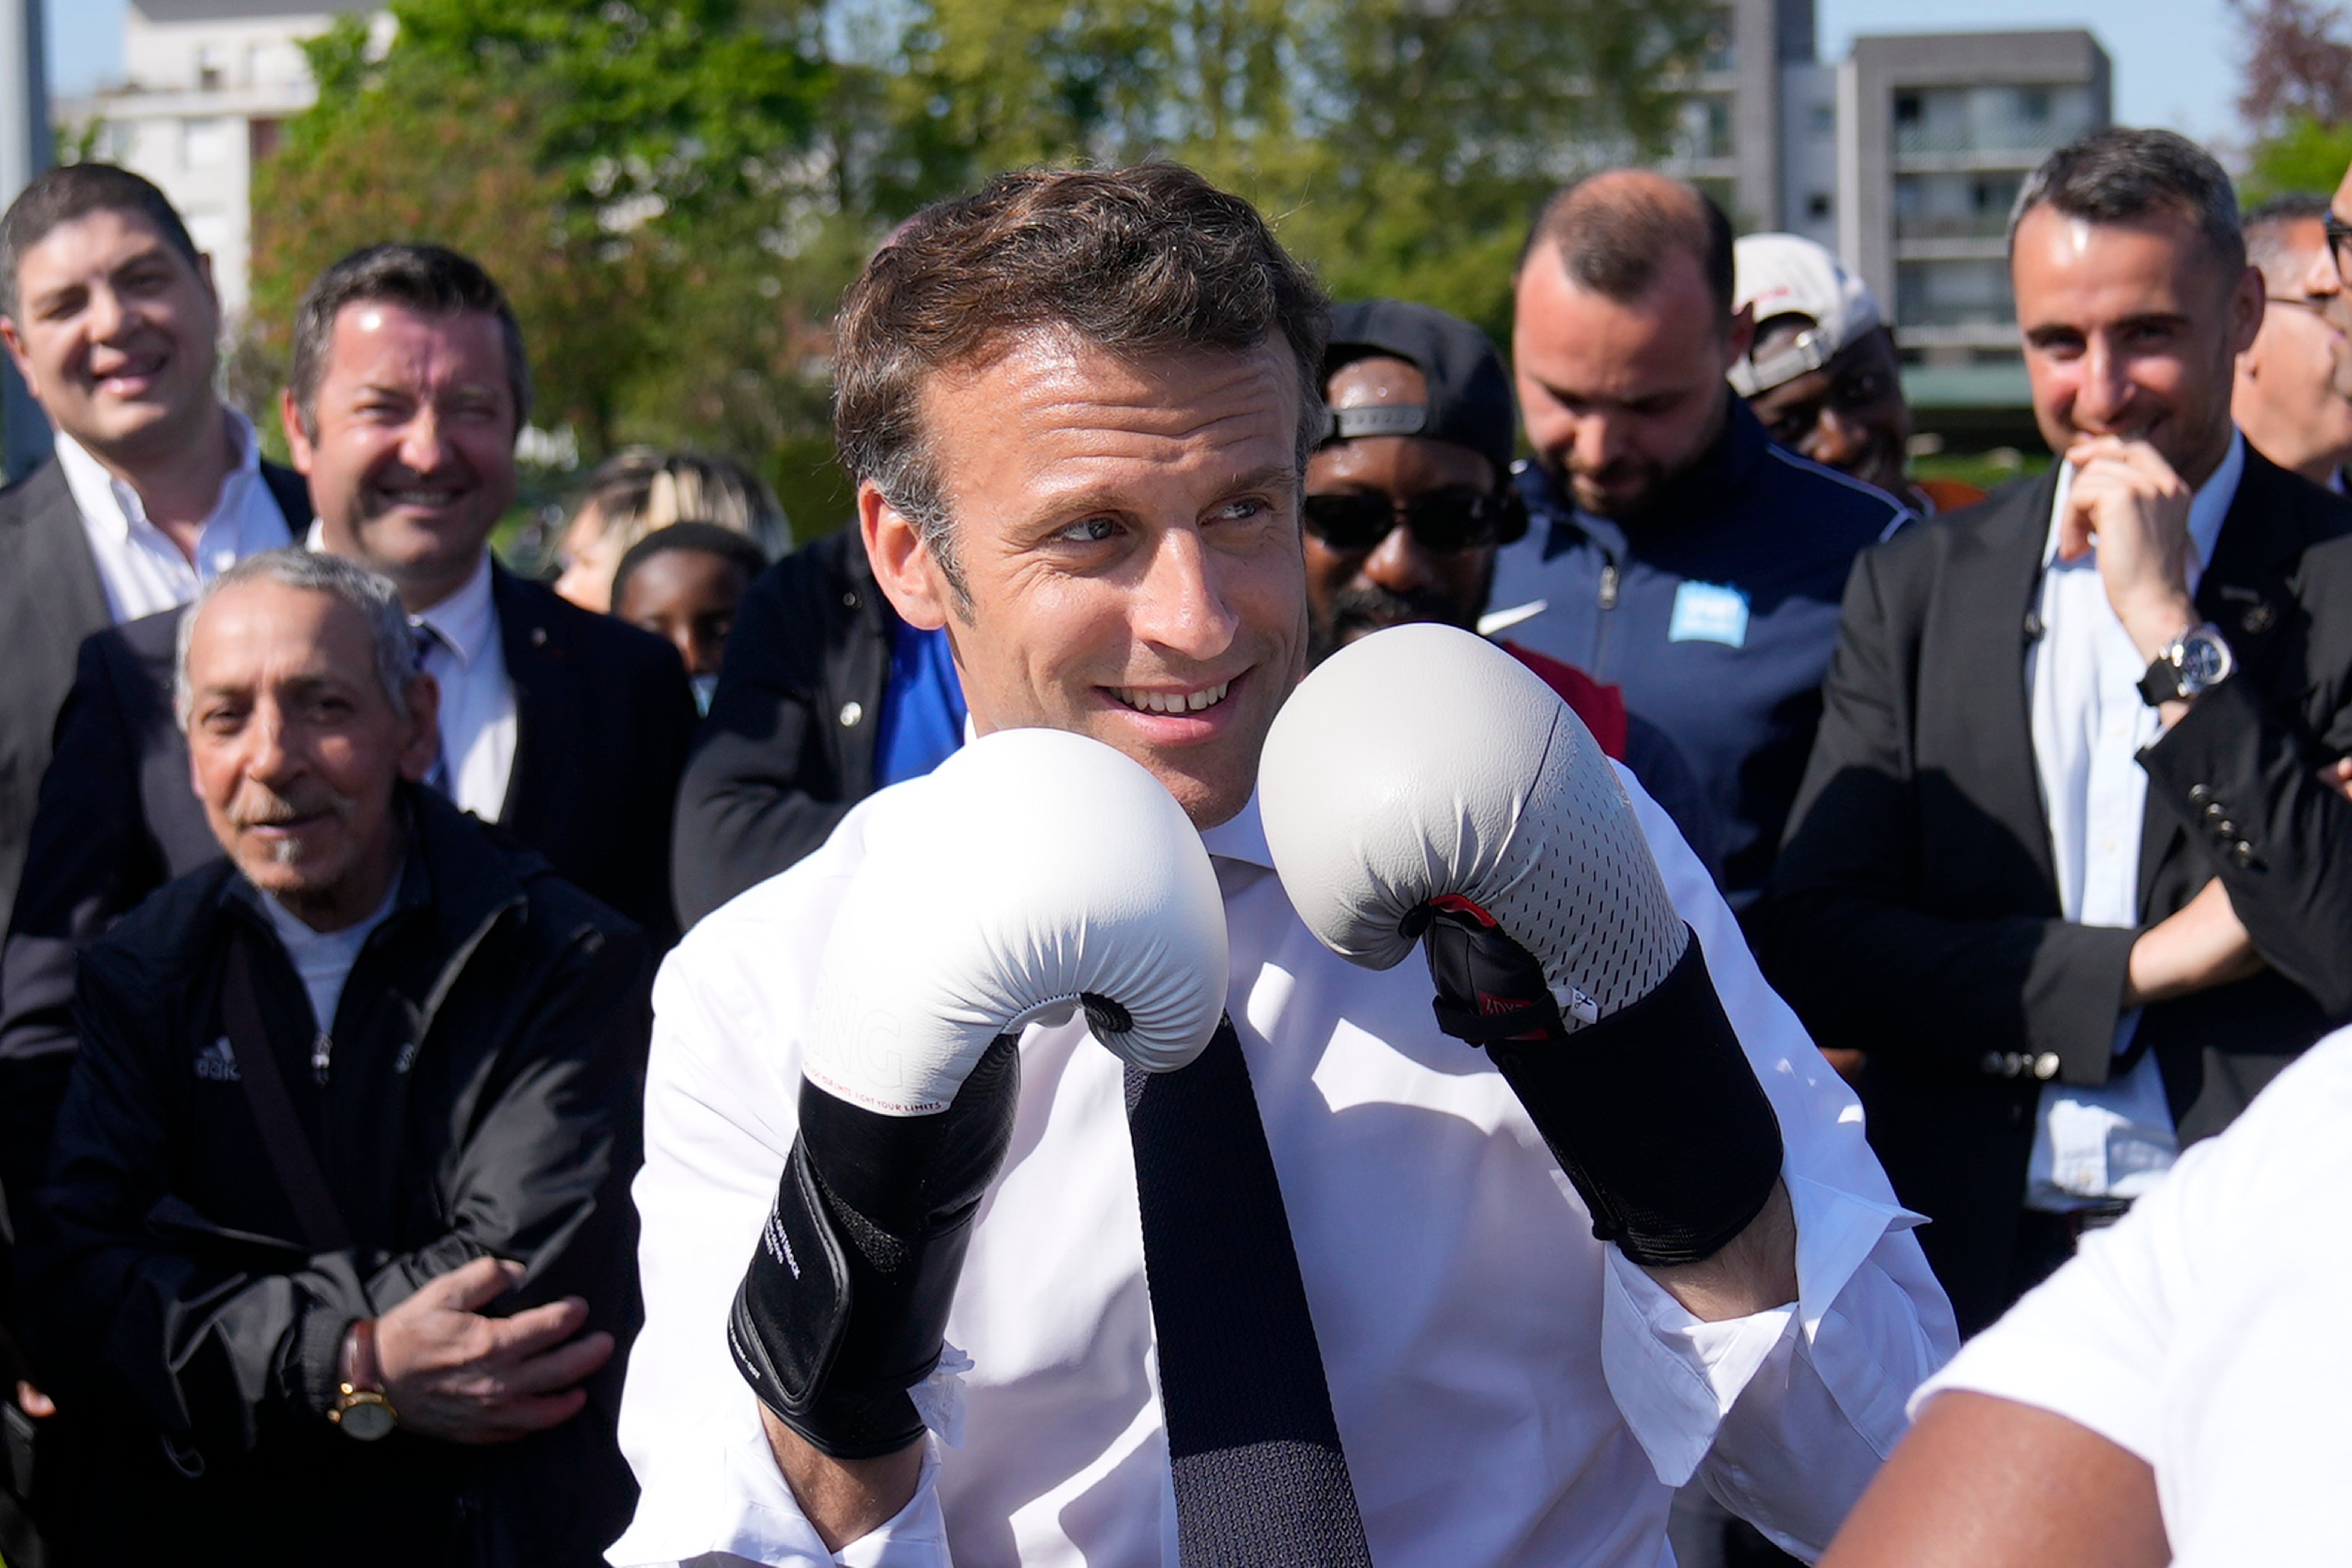 Macron wears boxing gloves as he campaigns in the Auguste Delaune stadium